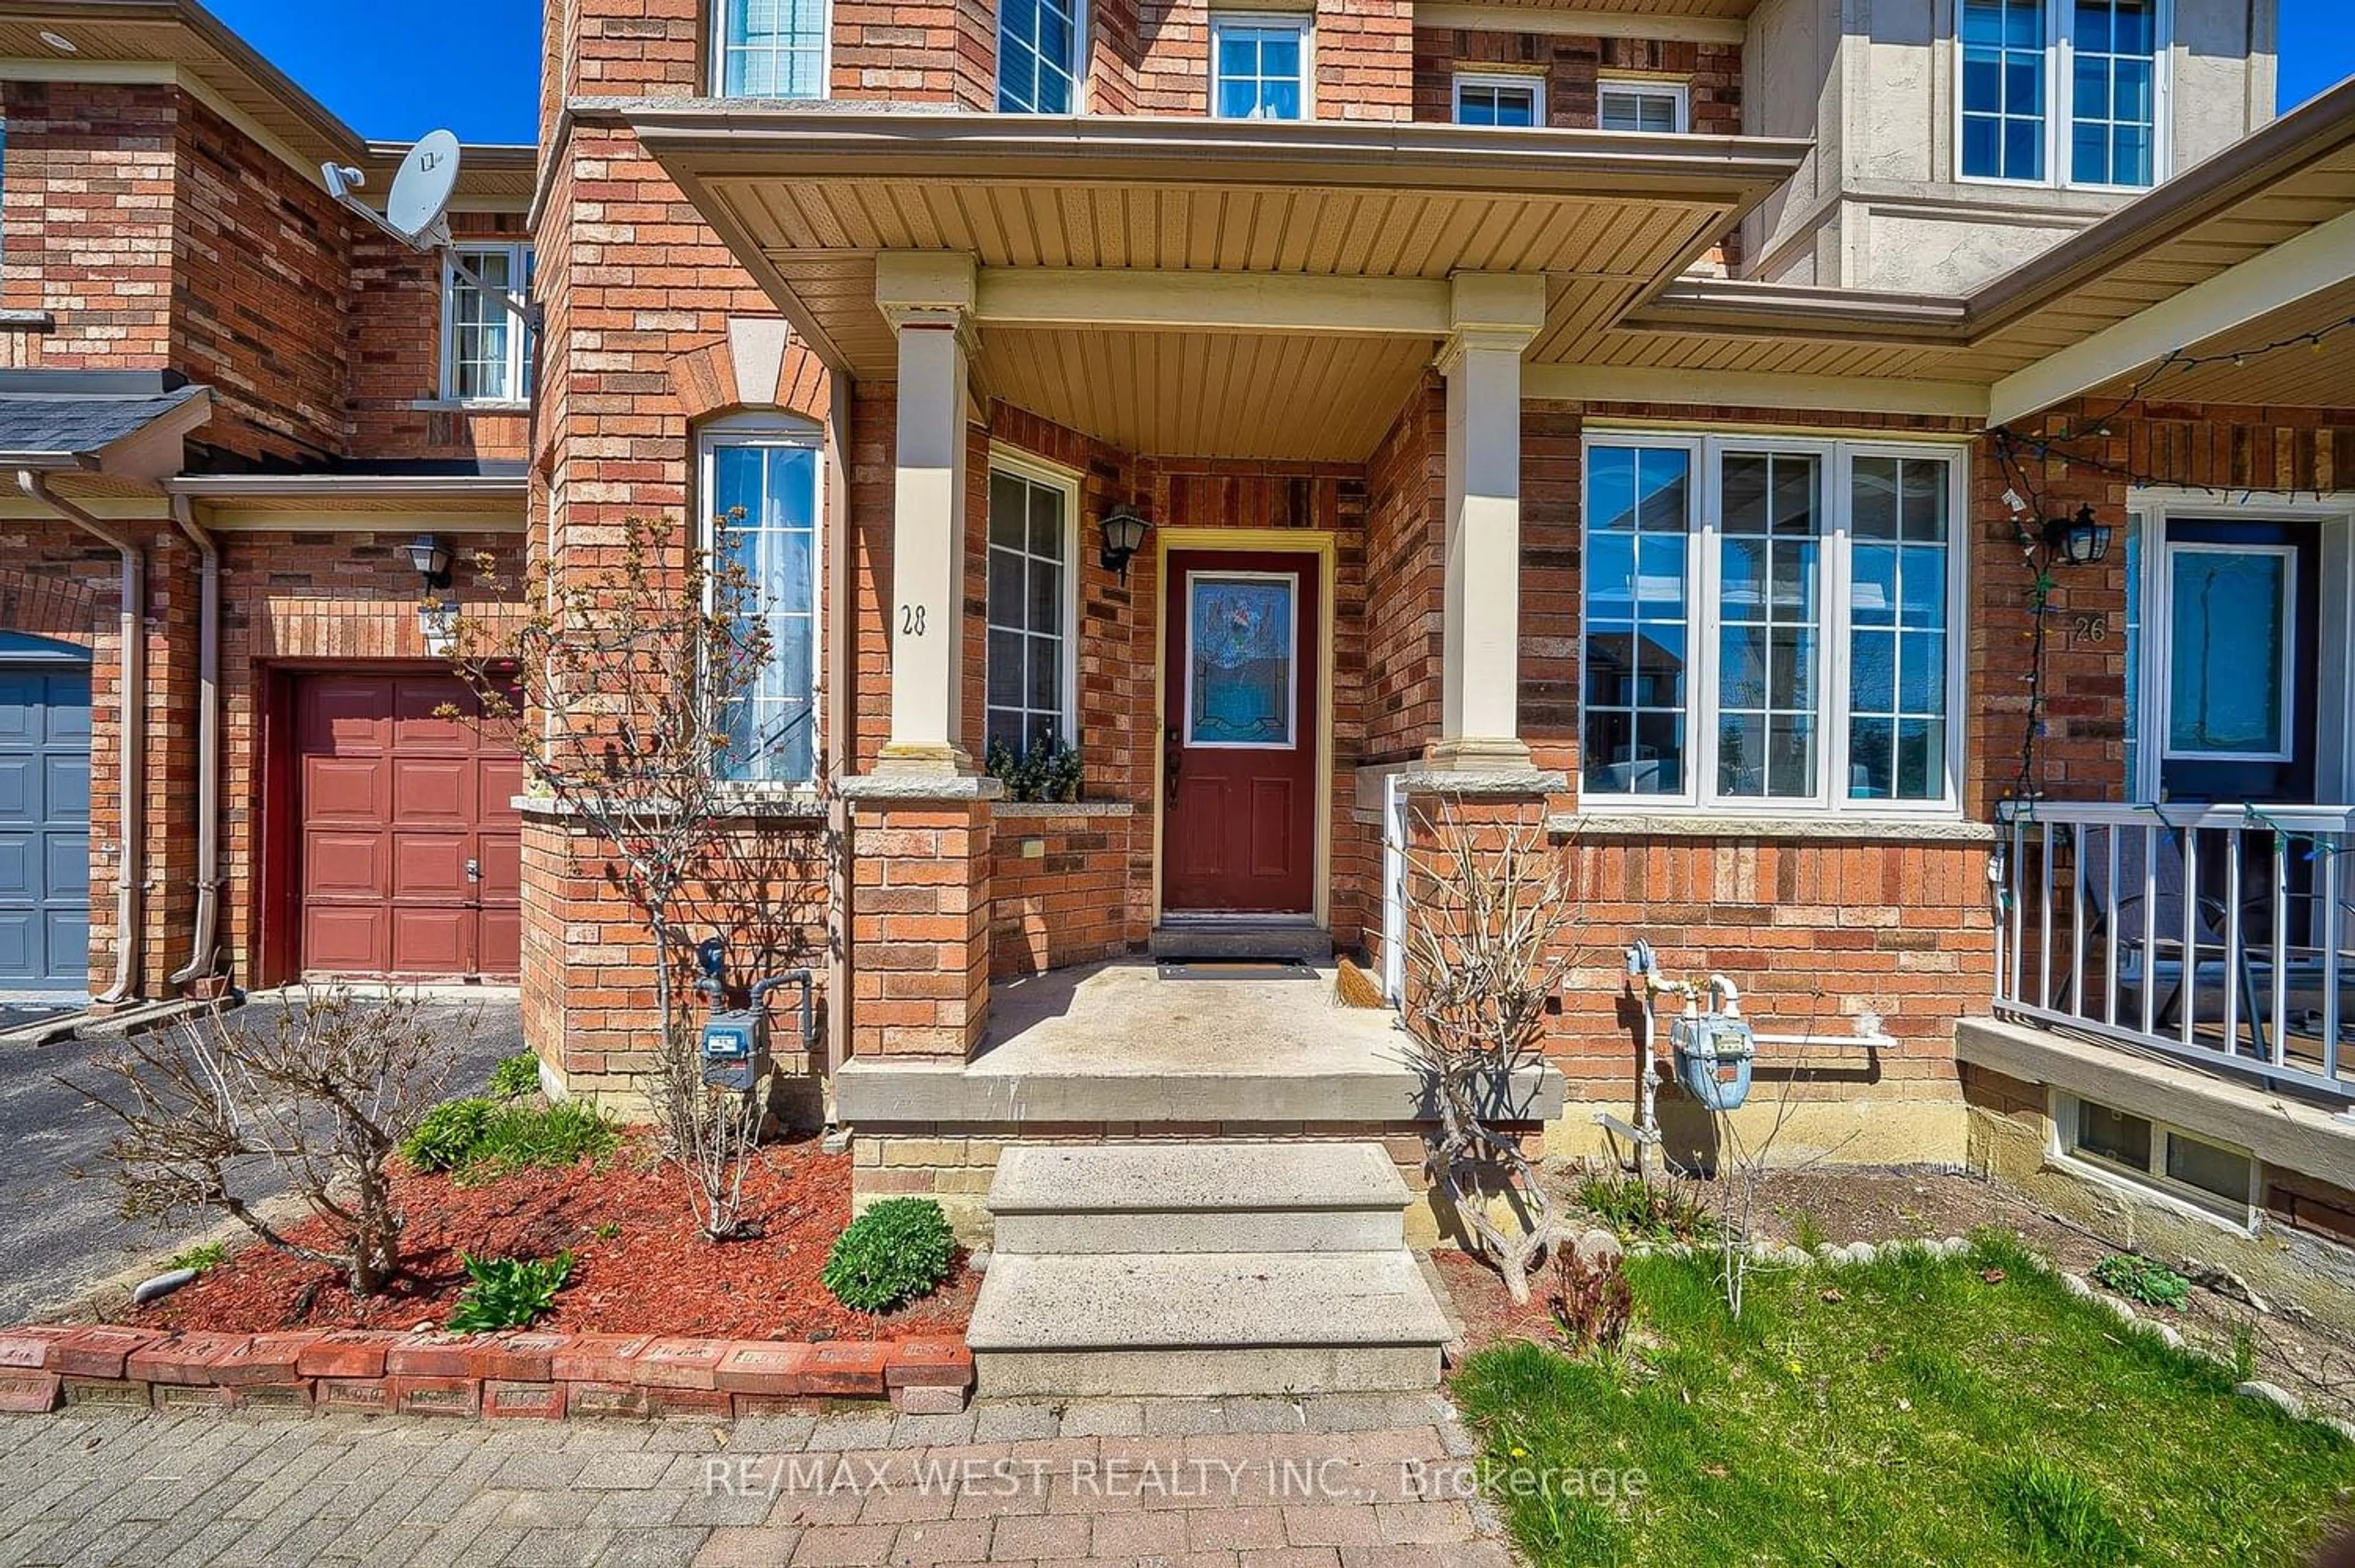 Home with brick exterior material for 28 Pompano Pl, Brampton Ontario L6P 1N5